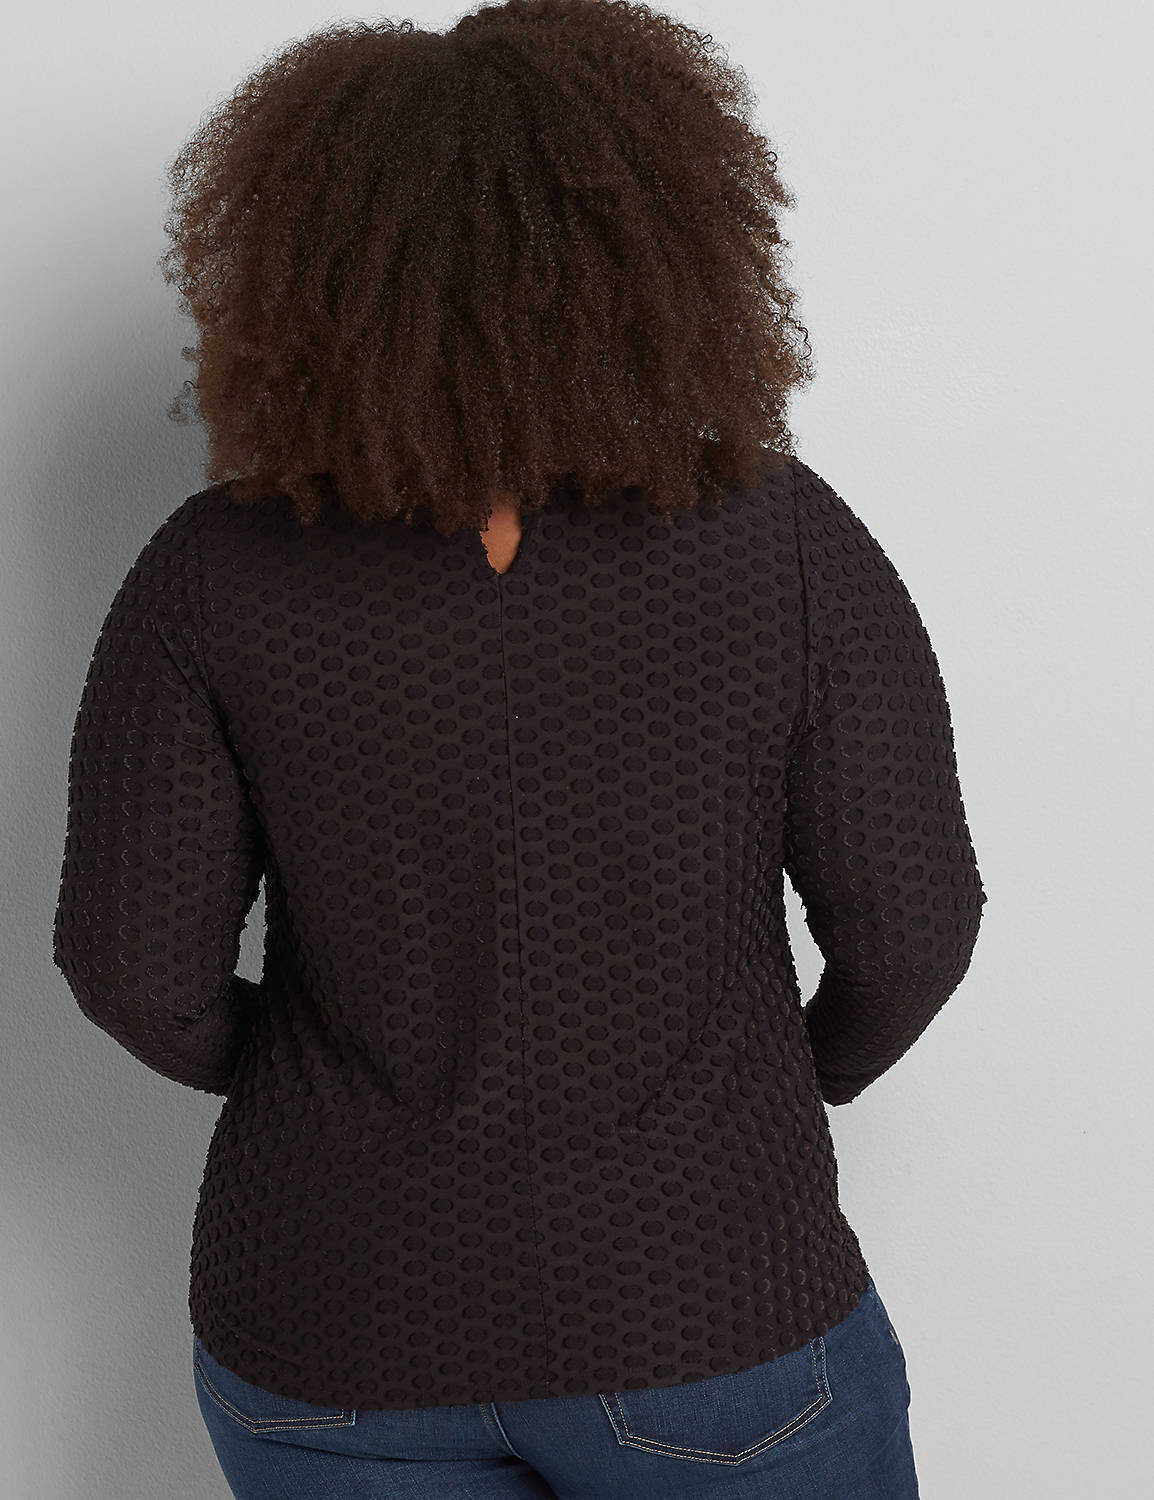 Long Sleeve Mock Neck Fitted Clip Dot Top 1117018:Pitch Black LB 1000322:18/20 Product Image 2